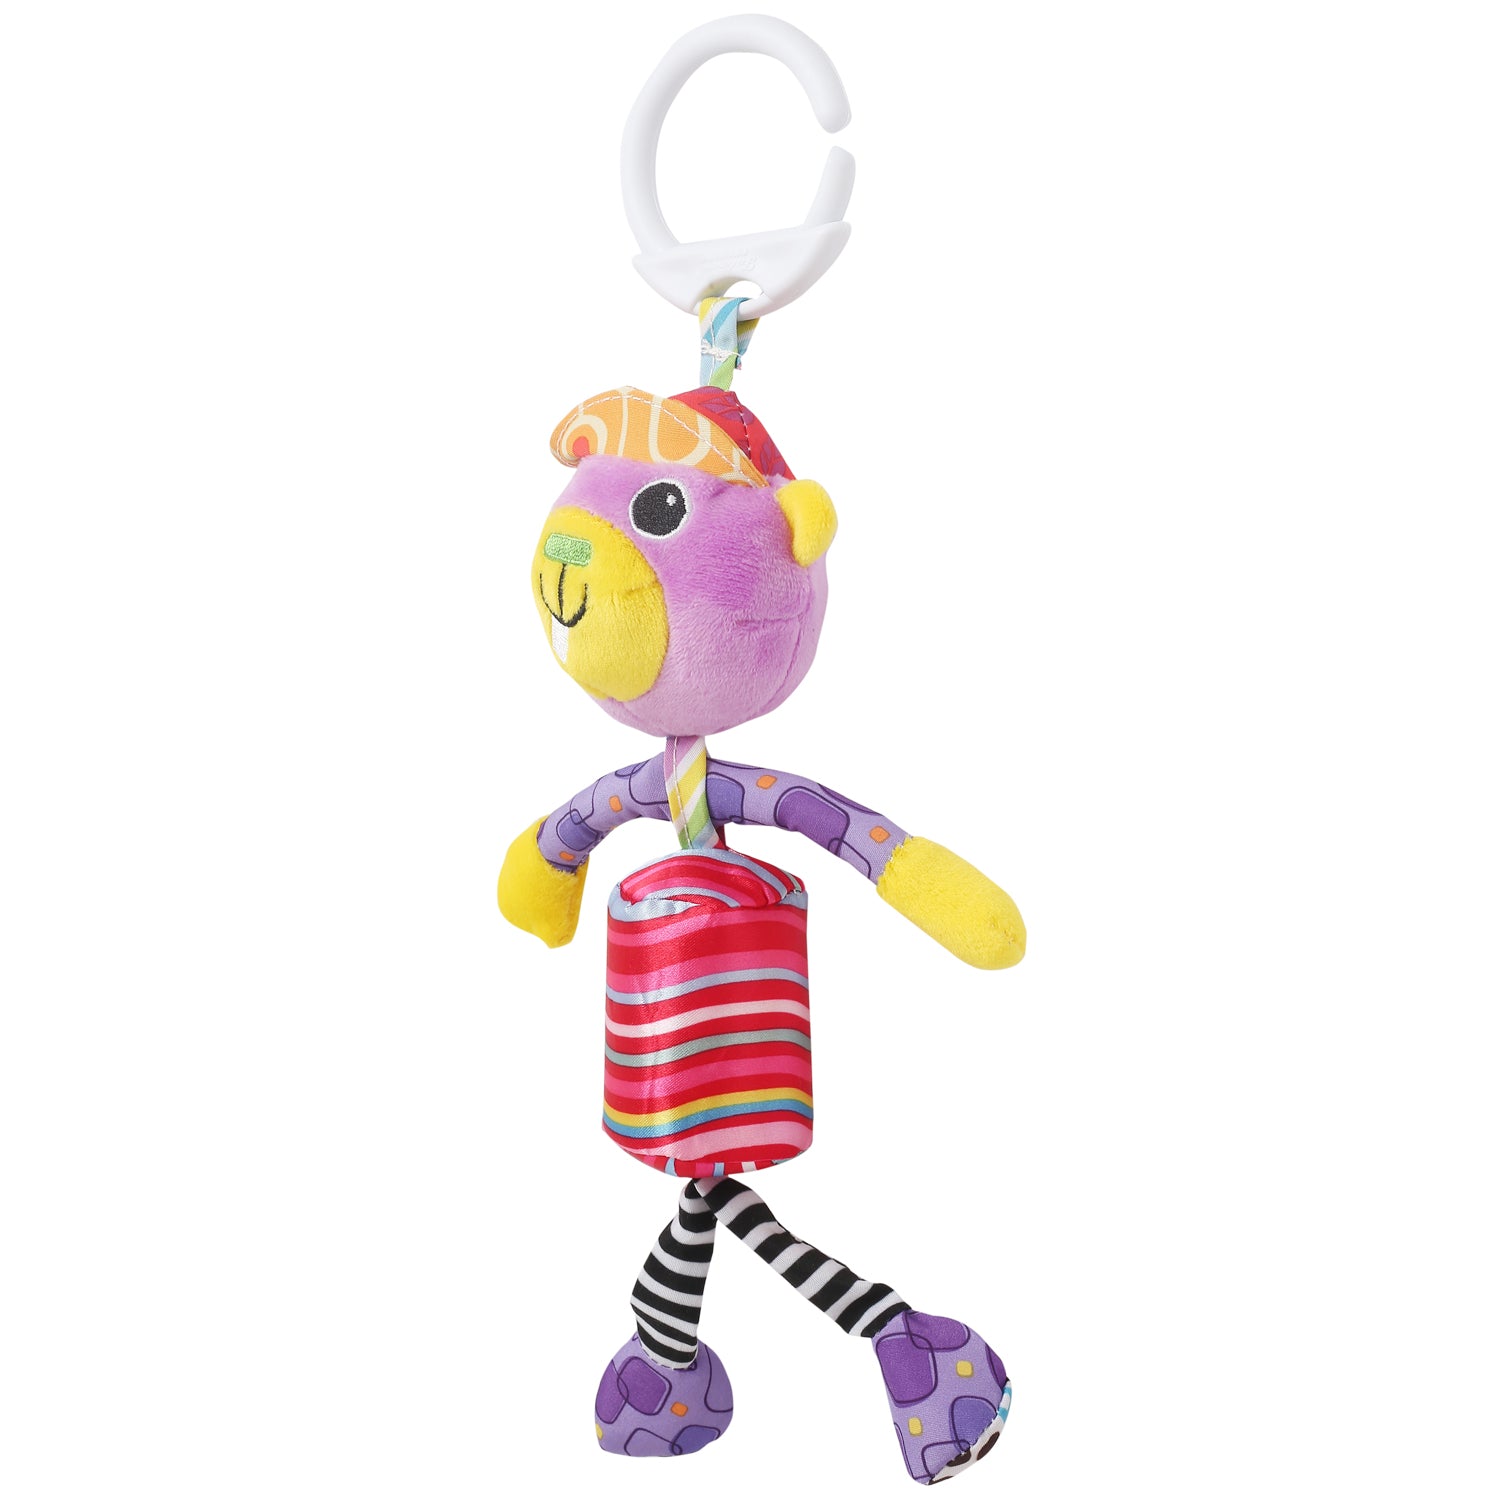 Monkey Purple Hanging Musical Toy / Wind Chime Soft Rattle - Baby Moo